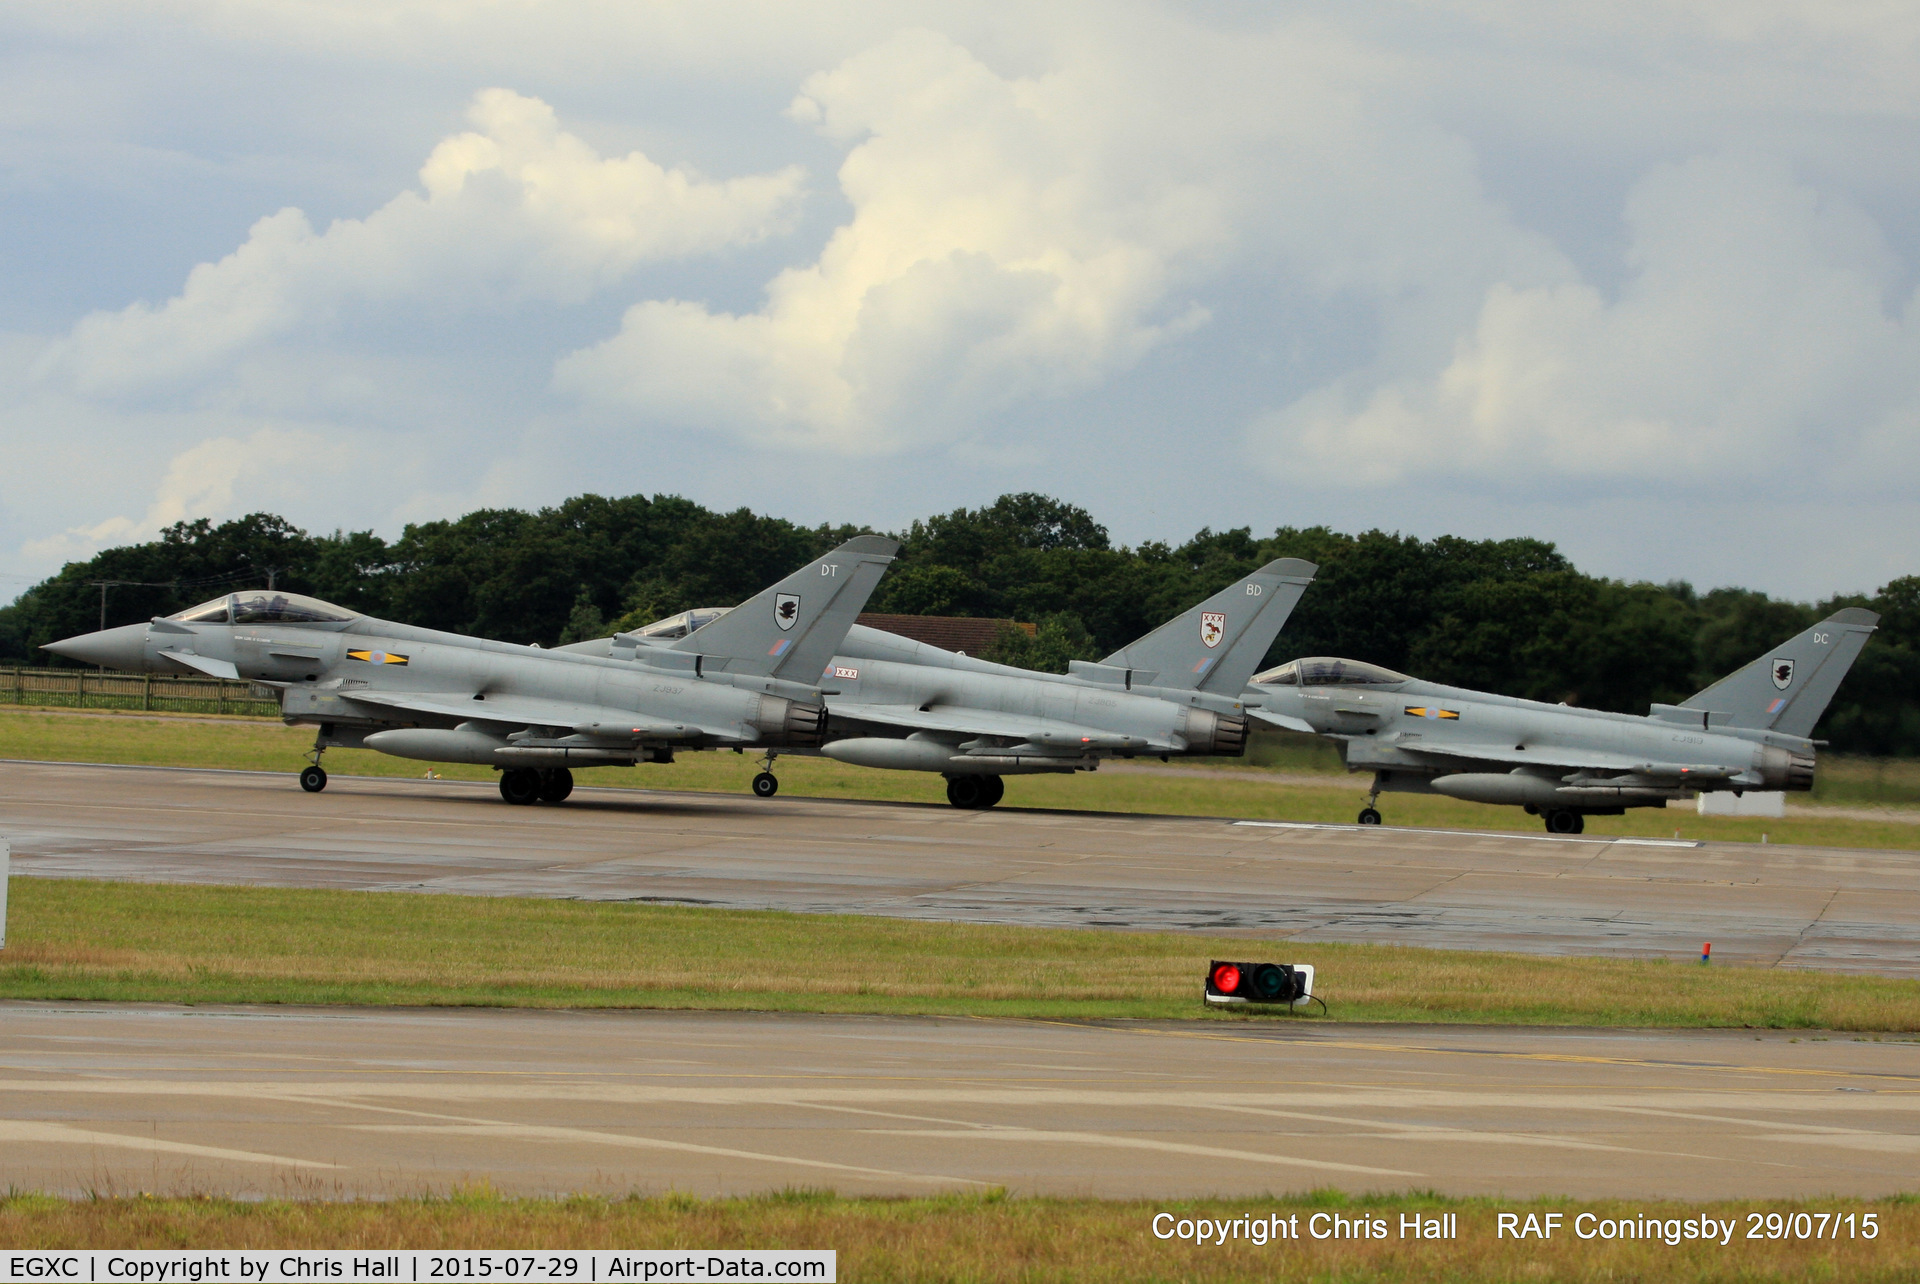 RAF Coningsby Airport, Coningsby, England United Kingdom (EGXC) - ZJ937, ZJ805 and ZJ919 lining up on the runway at RAF Coningsby